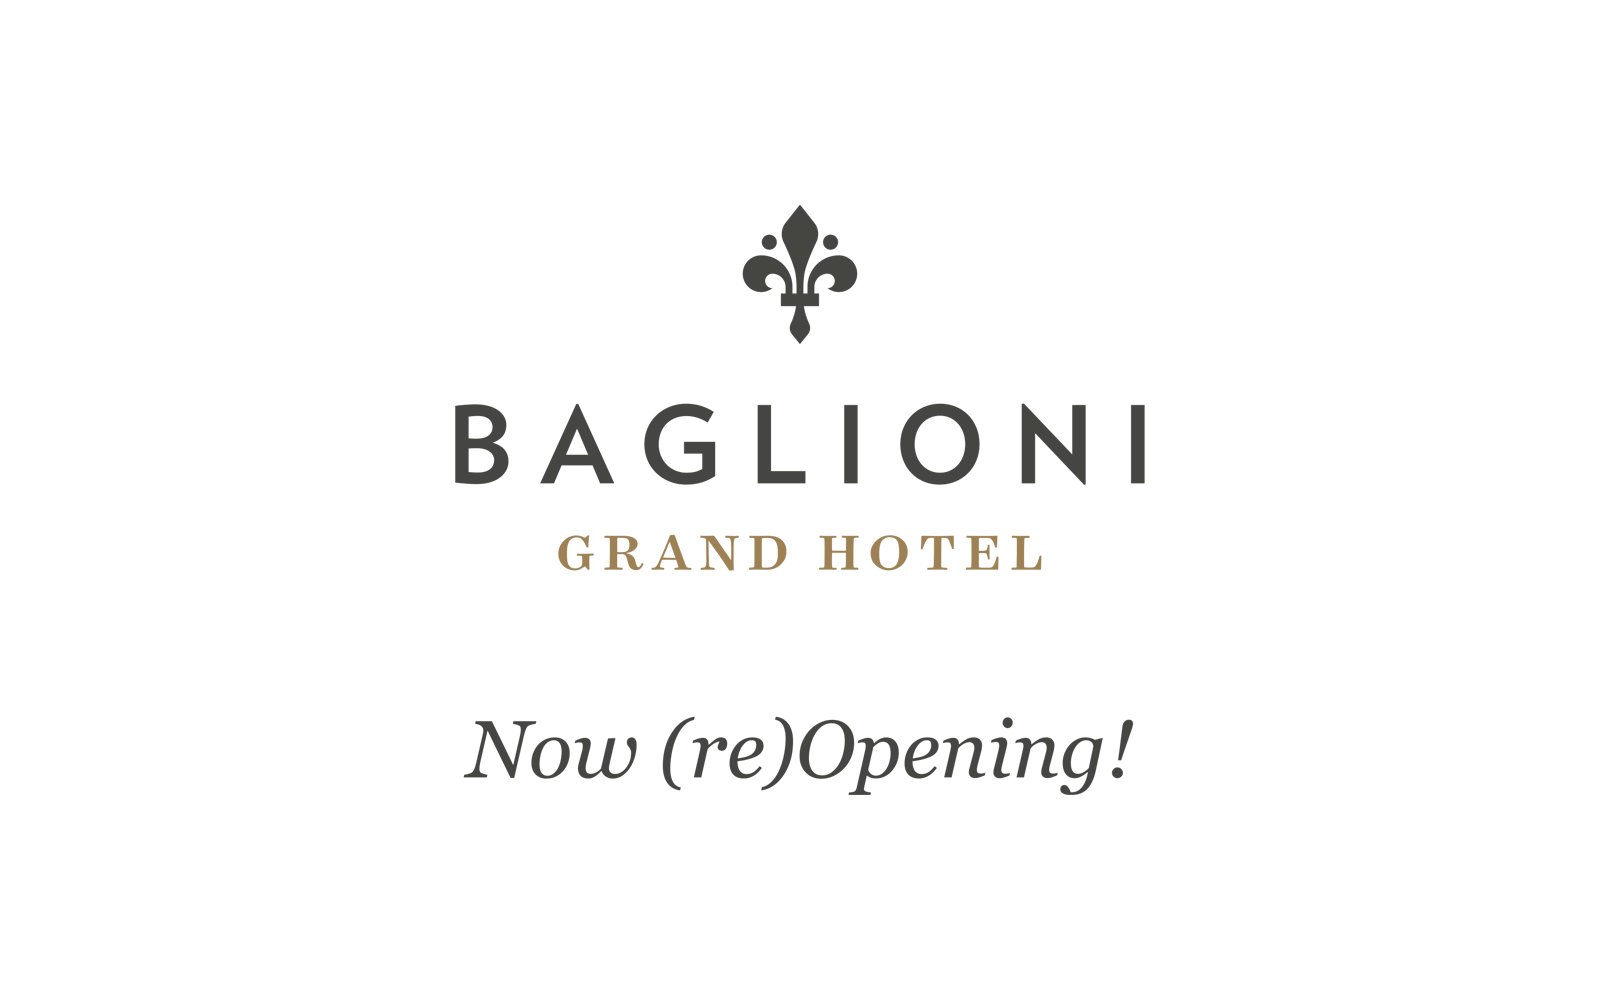 Grand Hotel Baglioni reopening